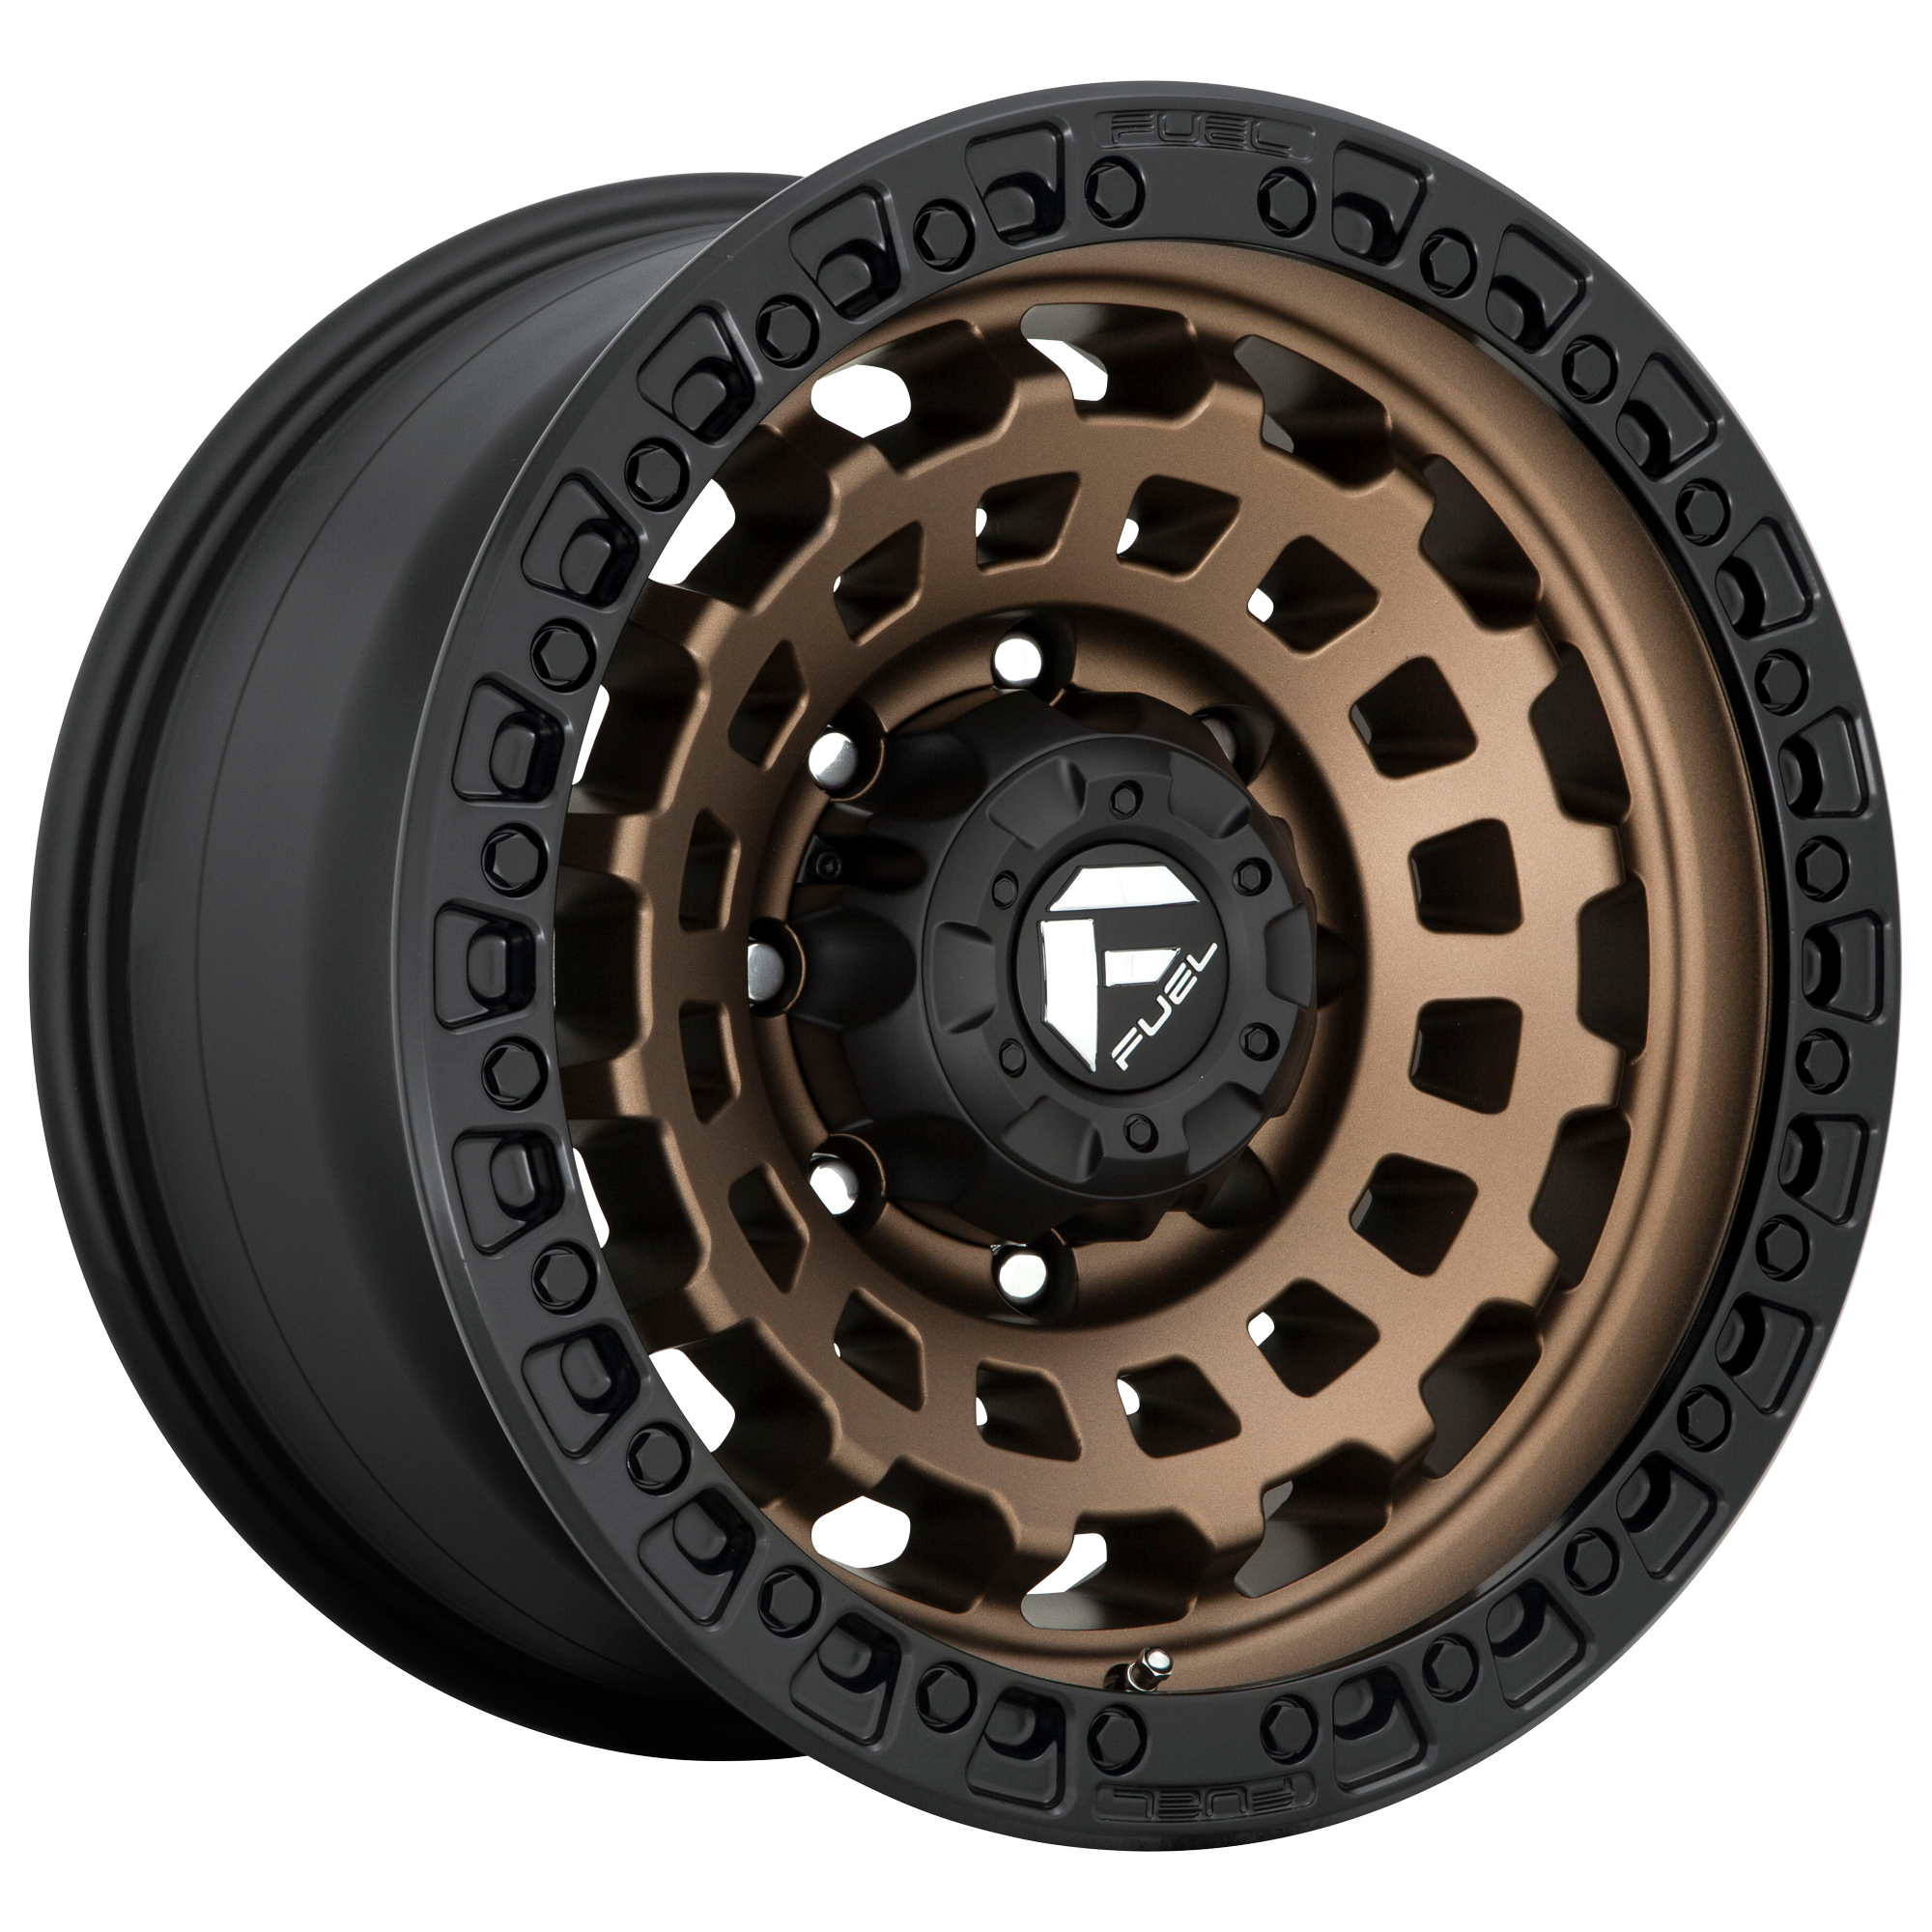 ZEPHYR 17x9 6x135.00 MATTE BRONZE BLACK BEAD RING (1 mm) - Tires and Engine Performance